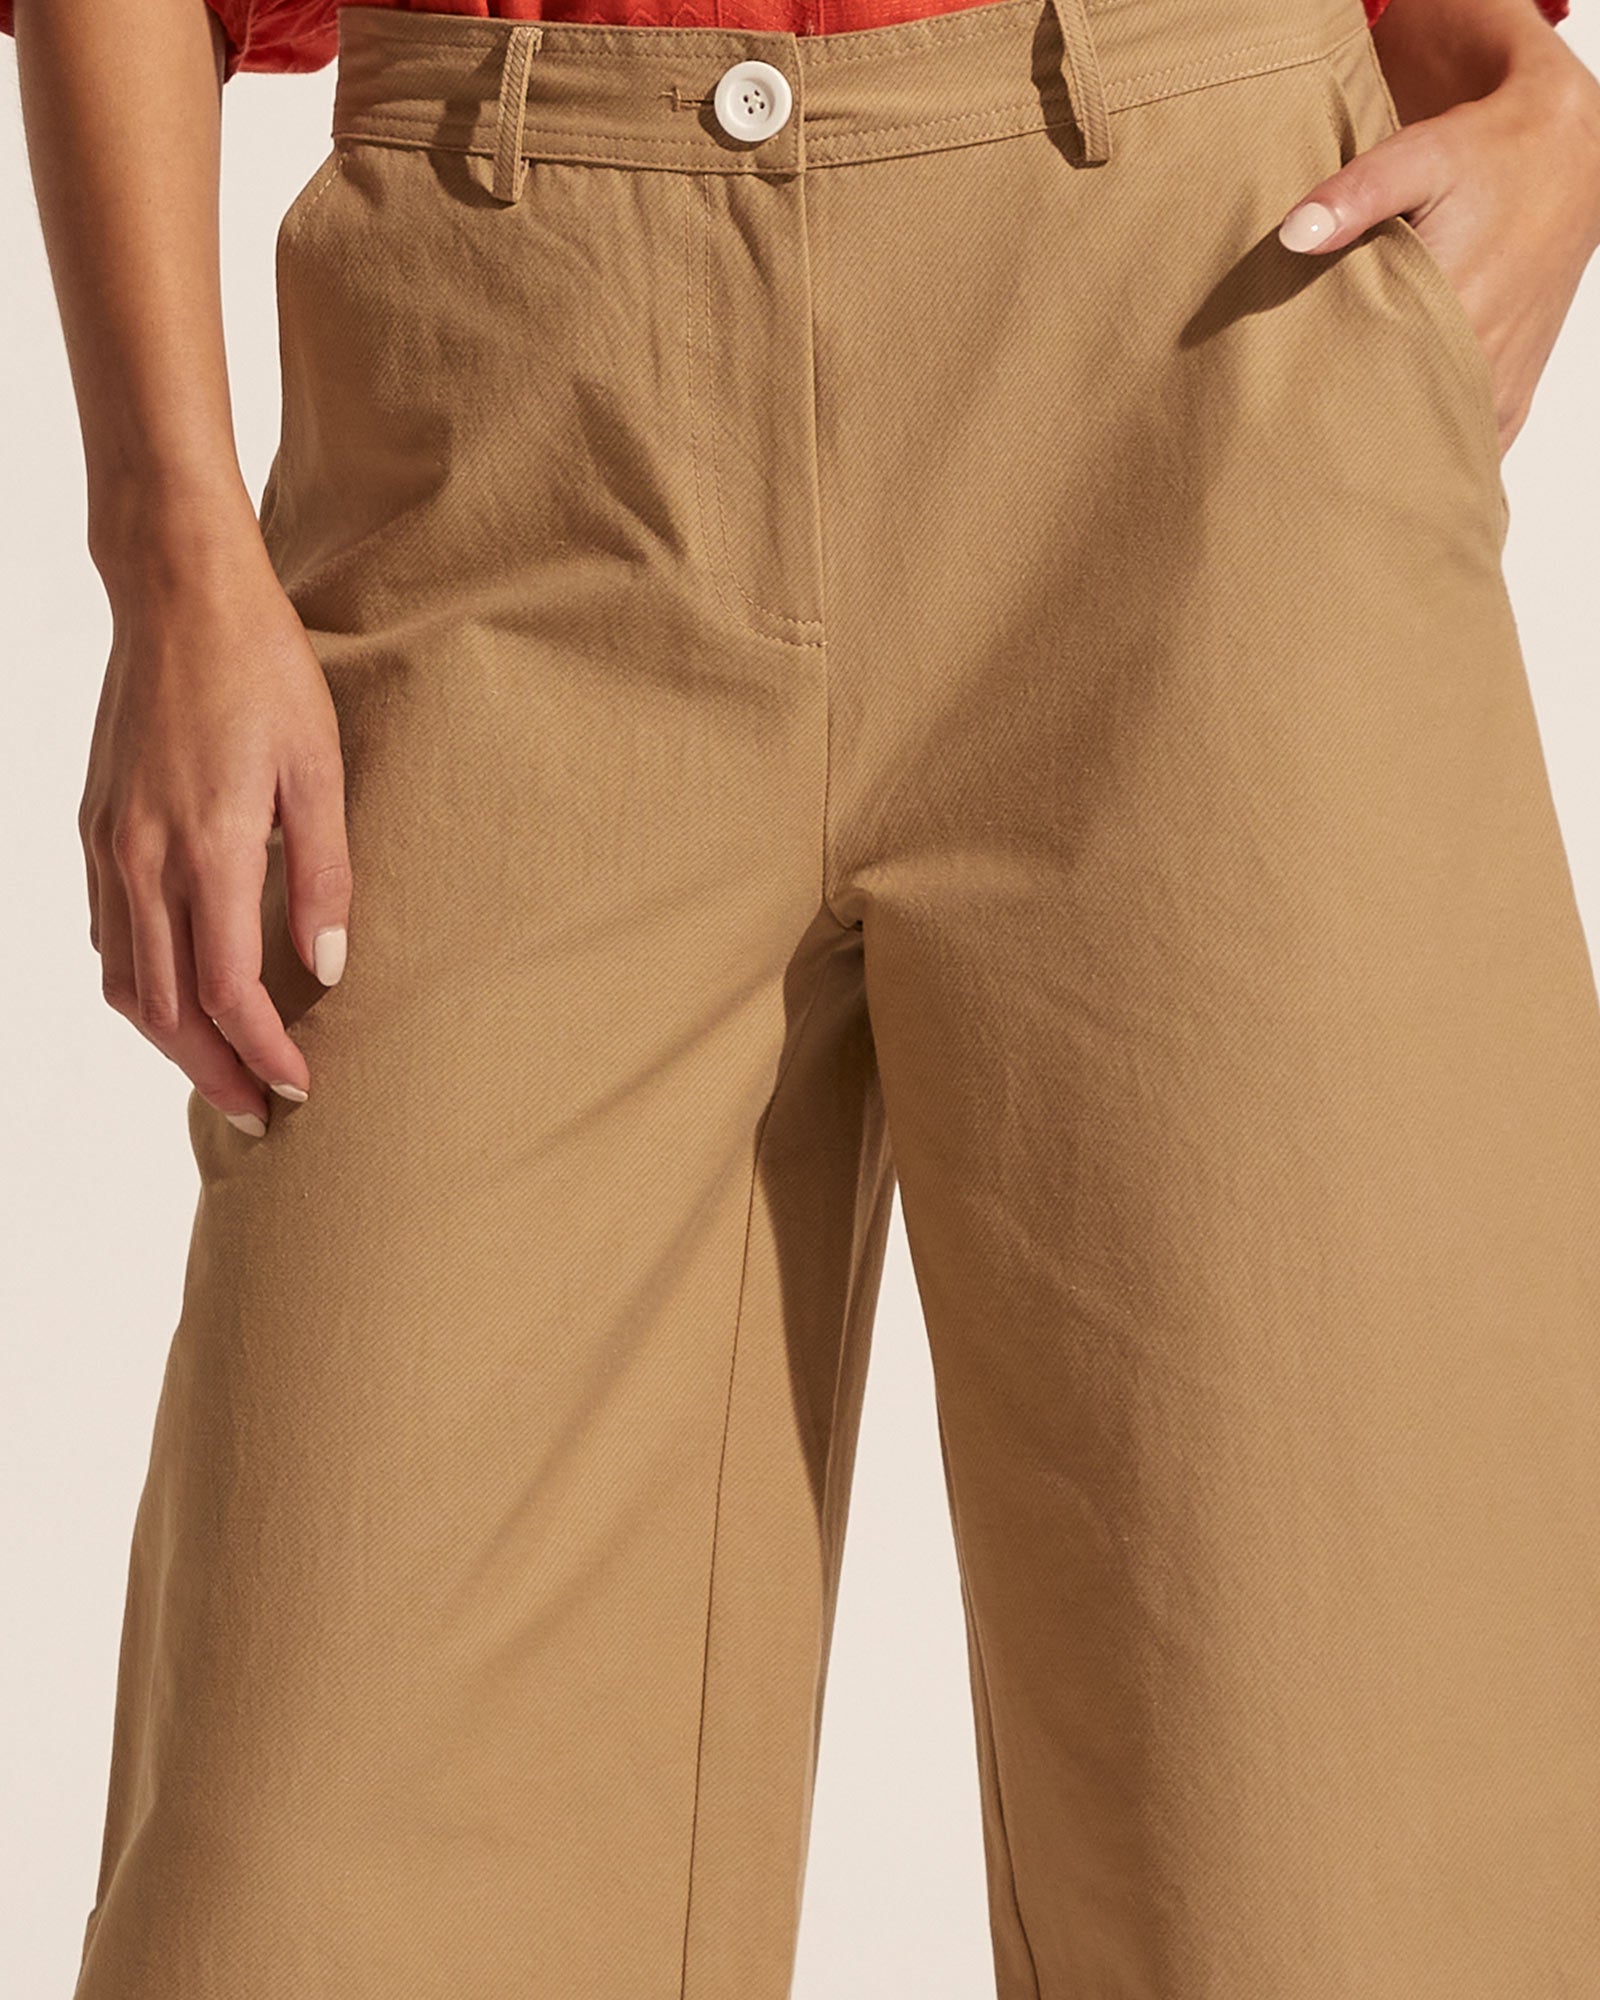 clarity pant - taupe